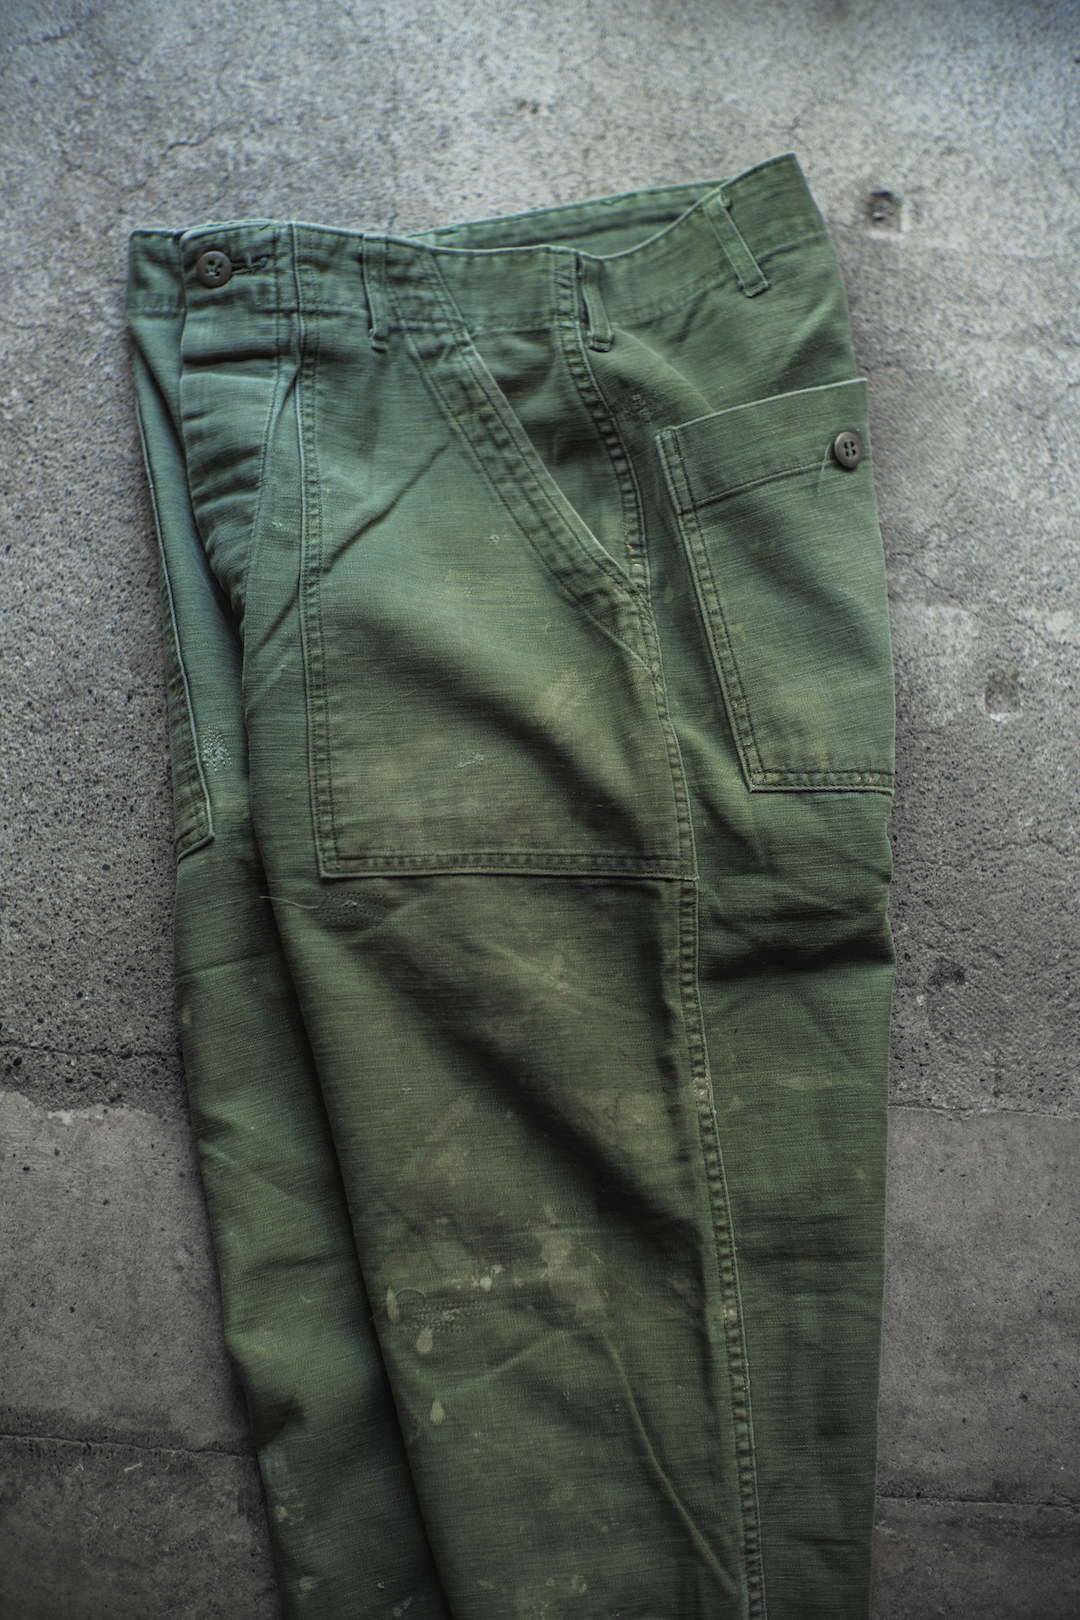 US ARMY BAKER PANTS REPAIRED 06